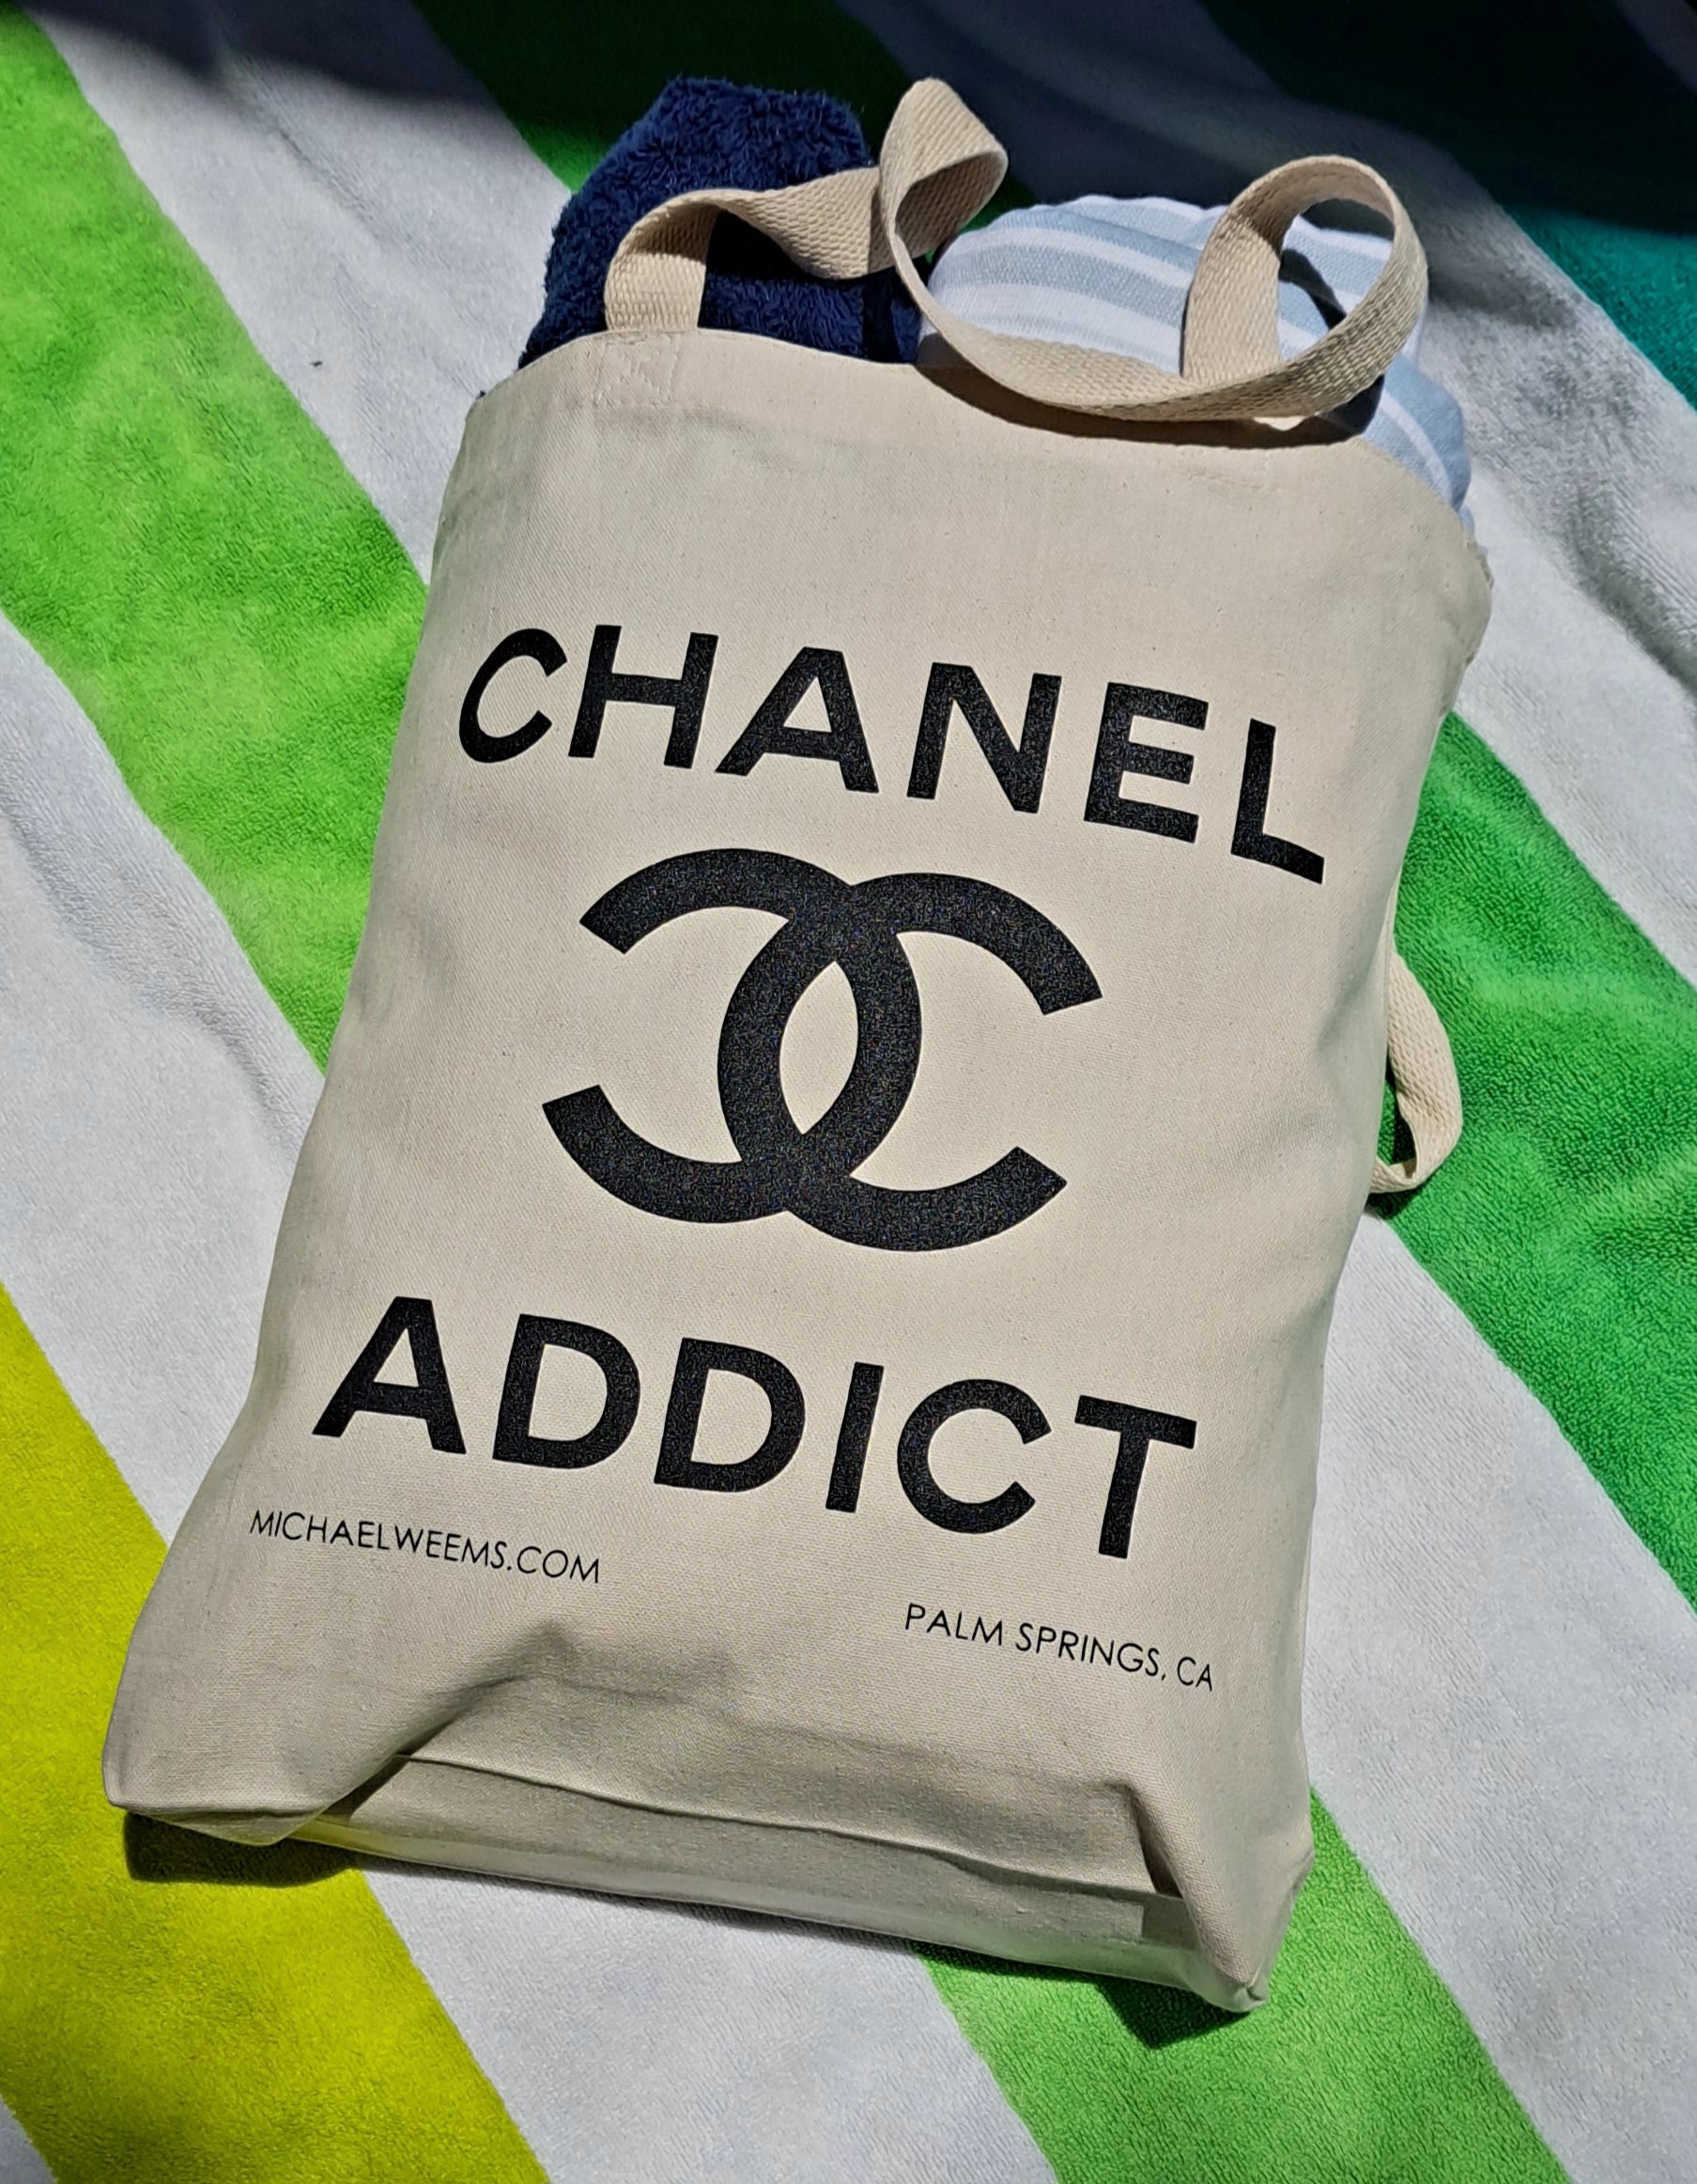 My Other Bag Is Chanel